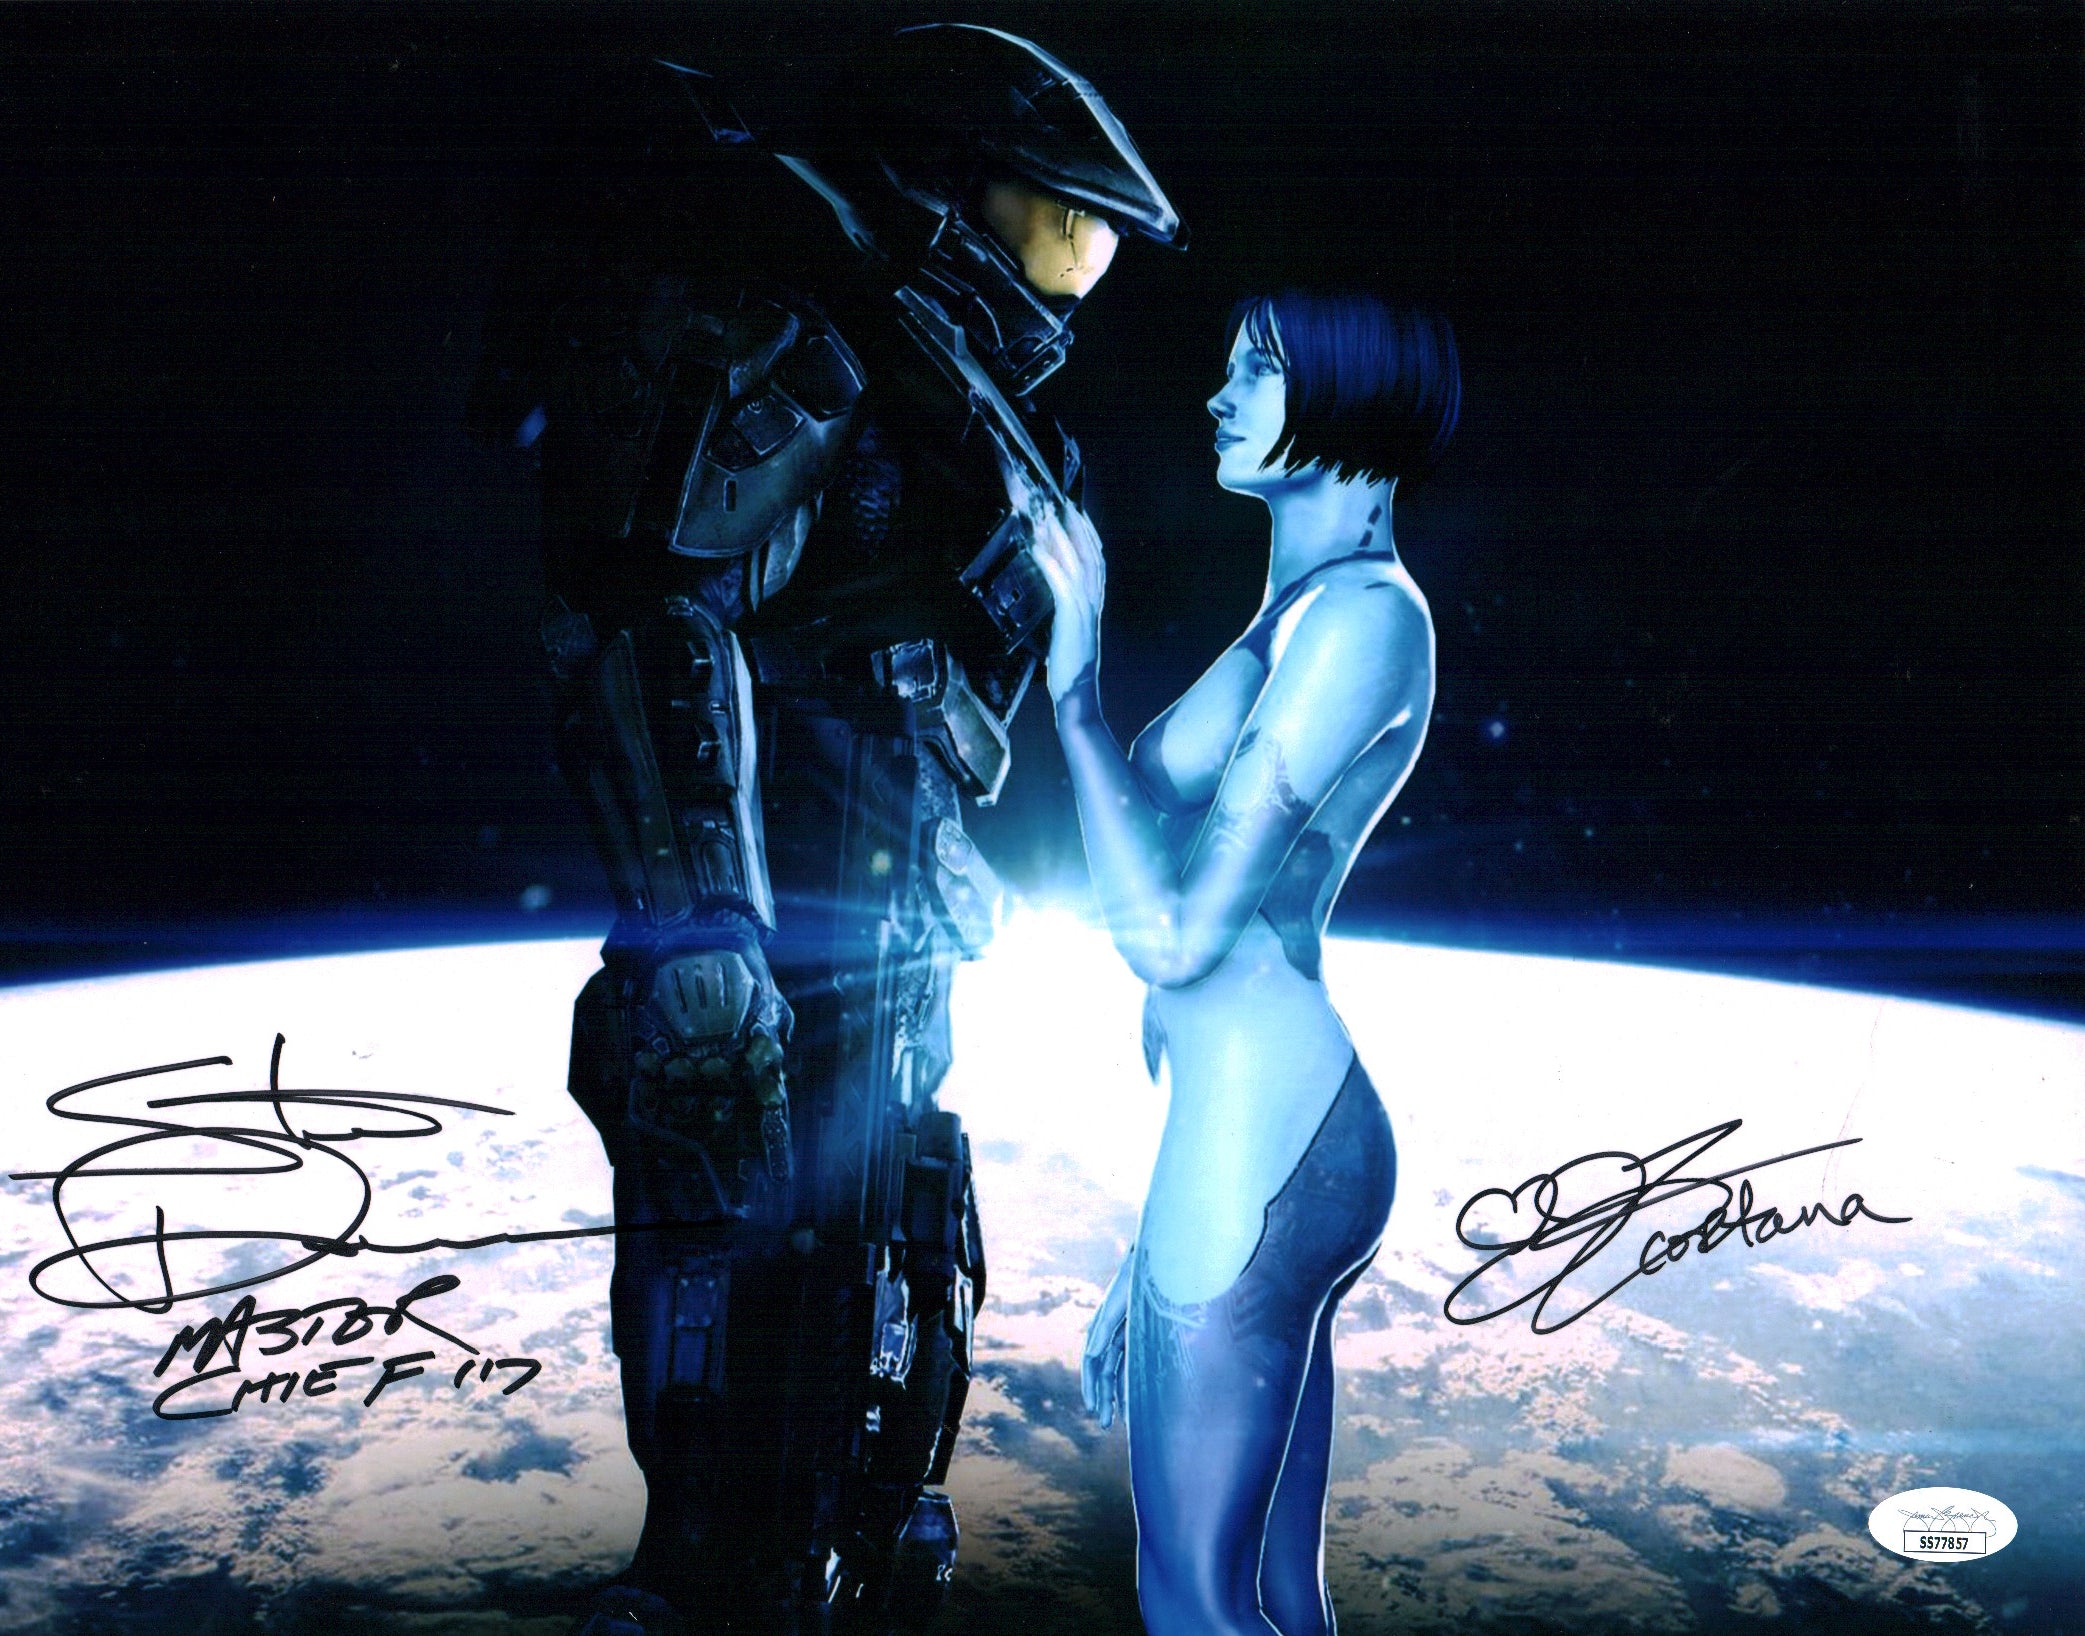 Halo 11x14 Signed Photo Poster Downes Taylor JSA COA Certified Autograph